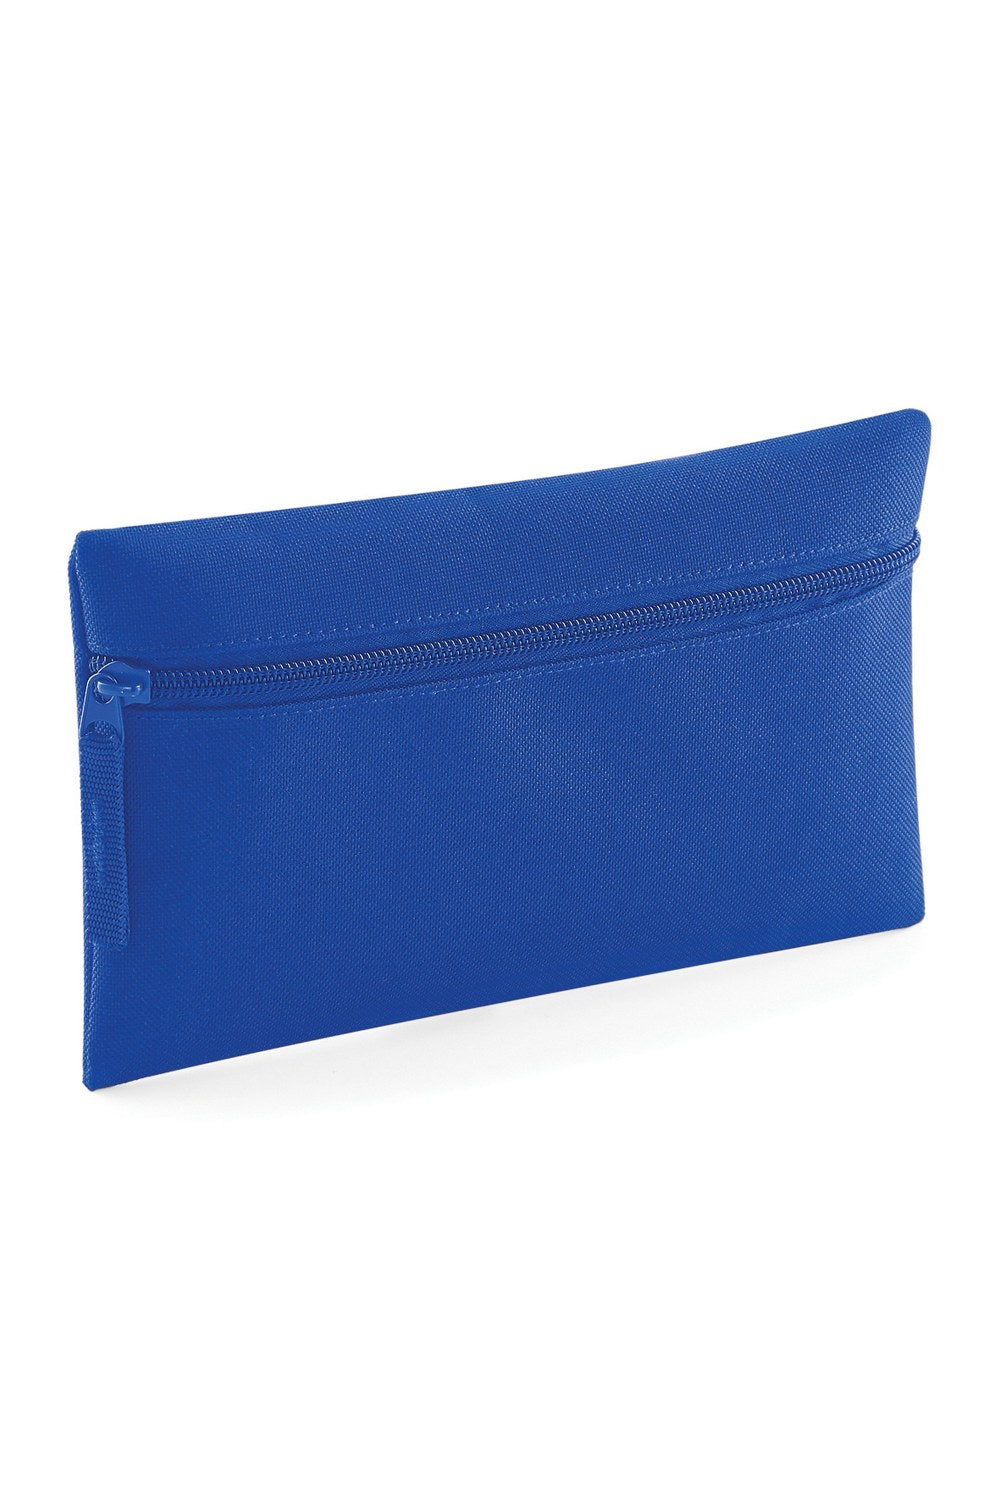 Classic Zip Up Pencil Case (Pack of 2) - Bright Royal